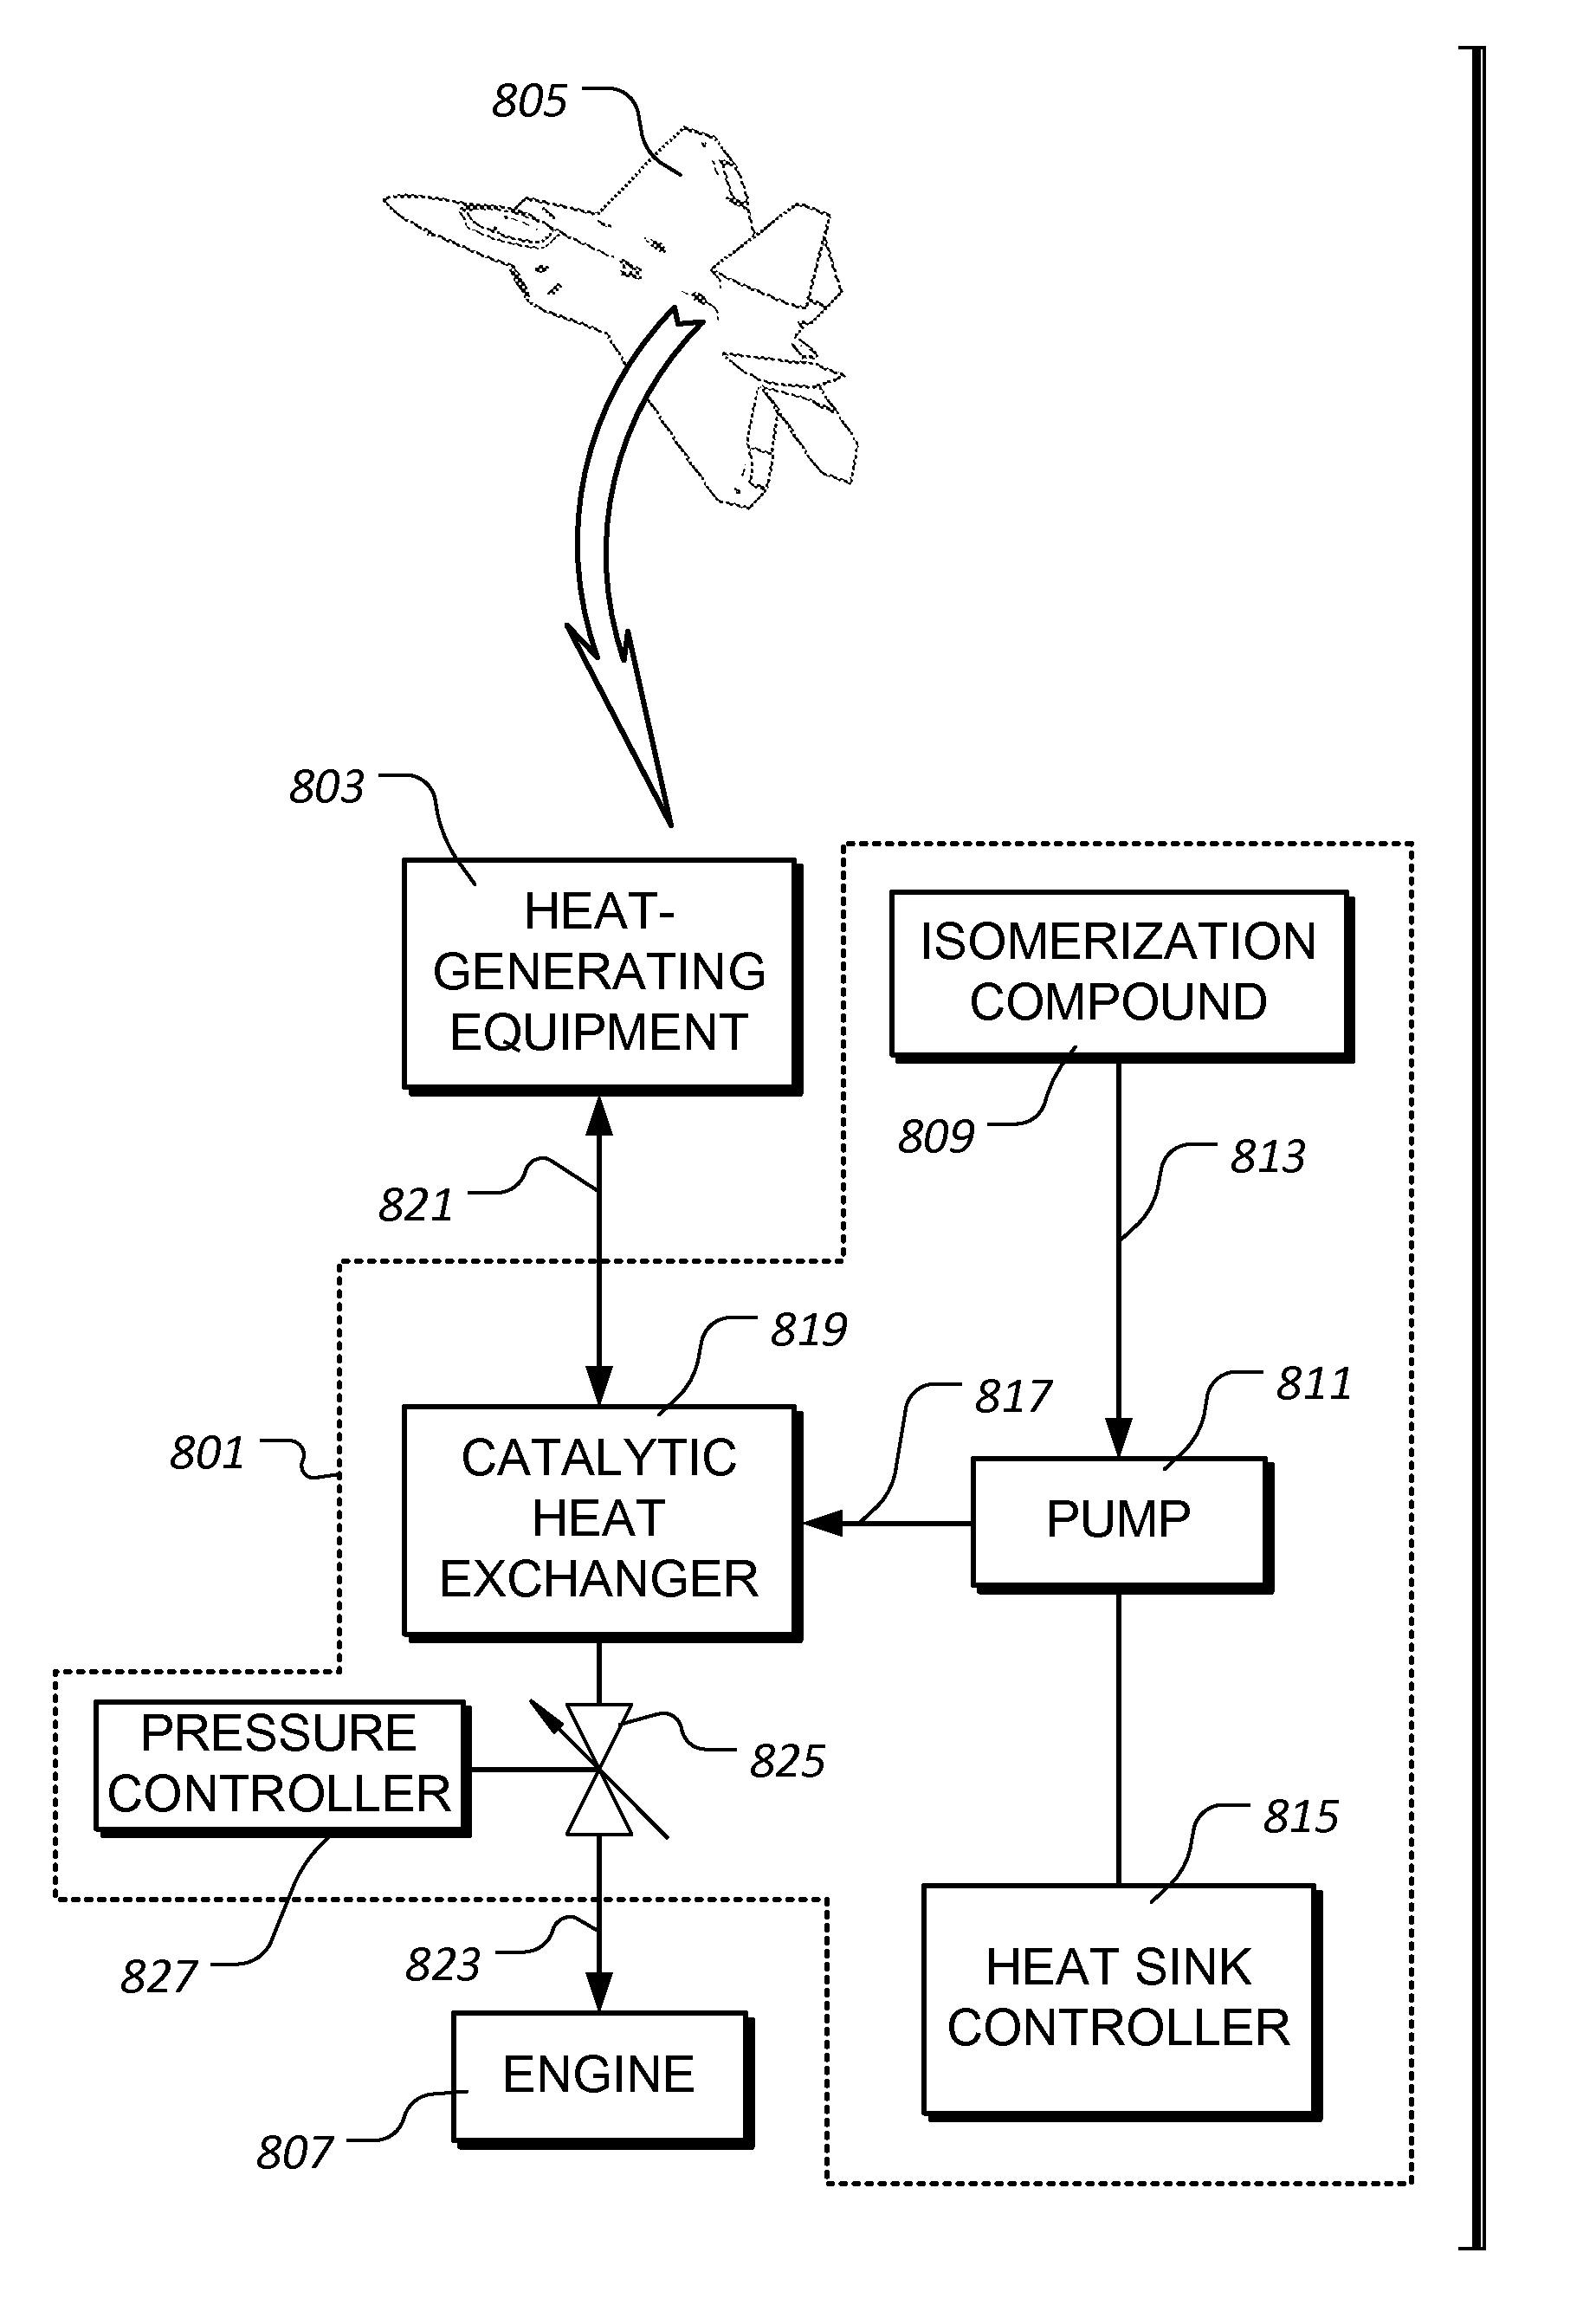 System and method for rejecting heat from equipment via endothermic isomerization